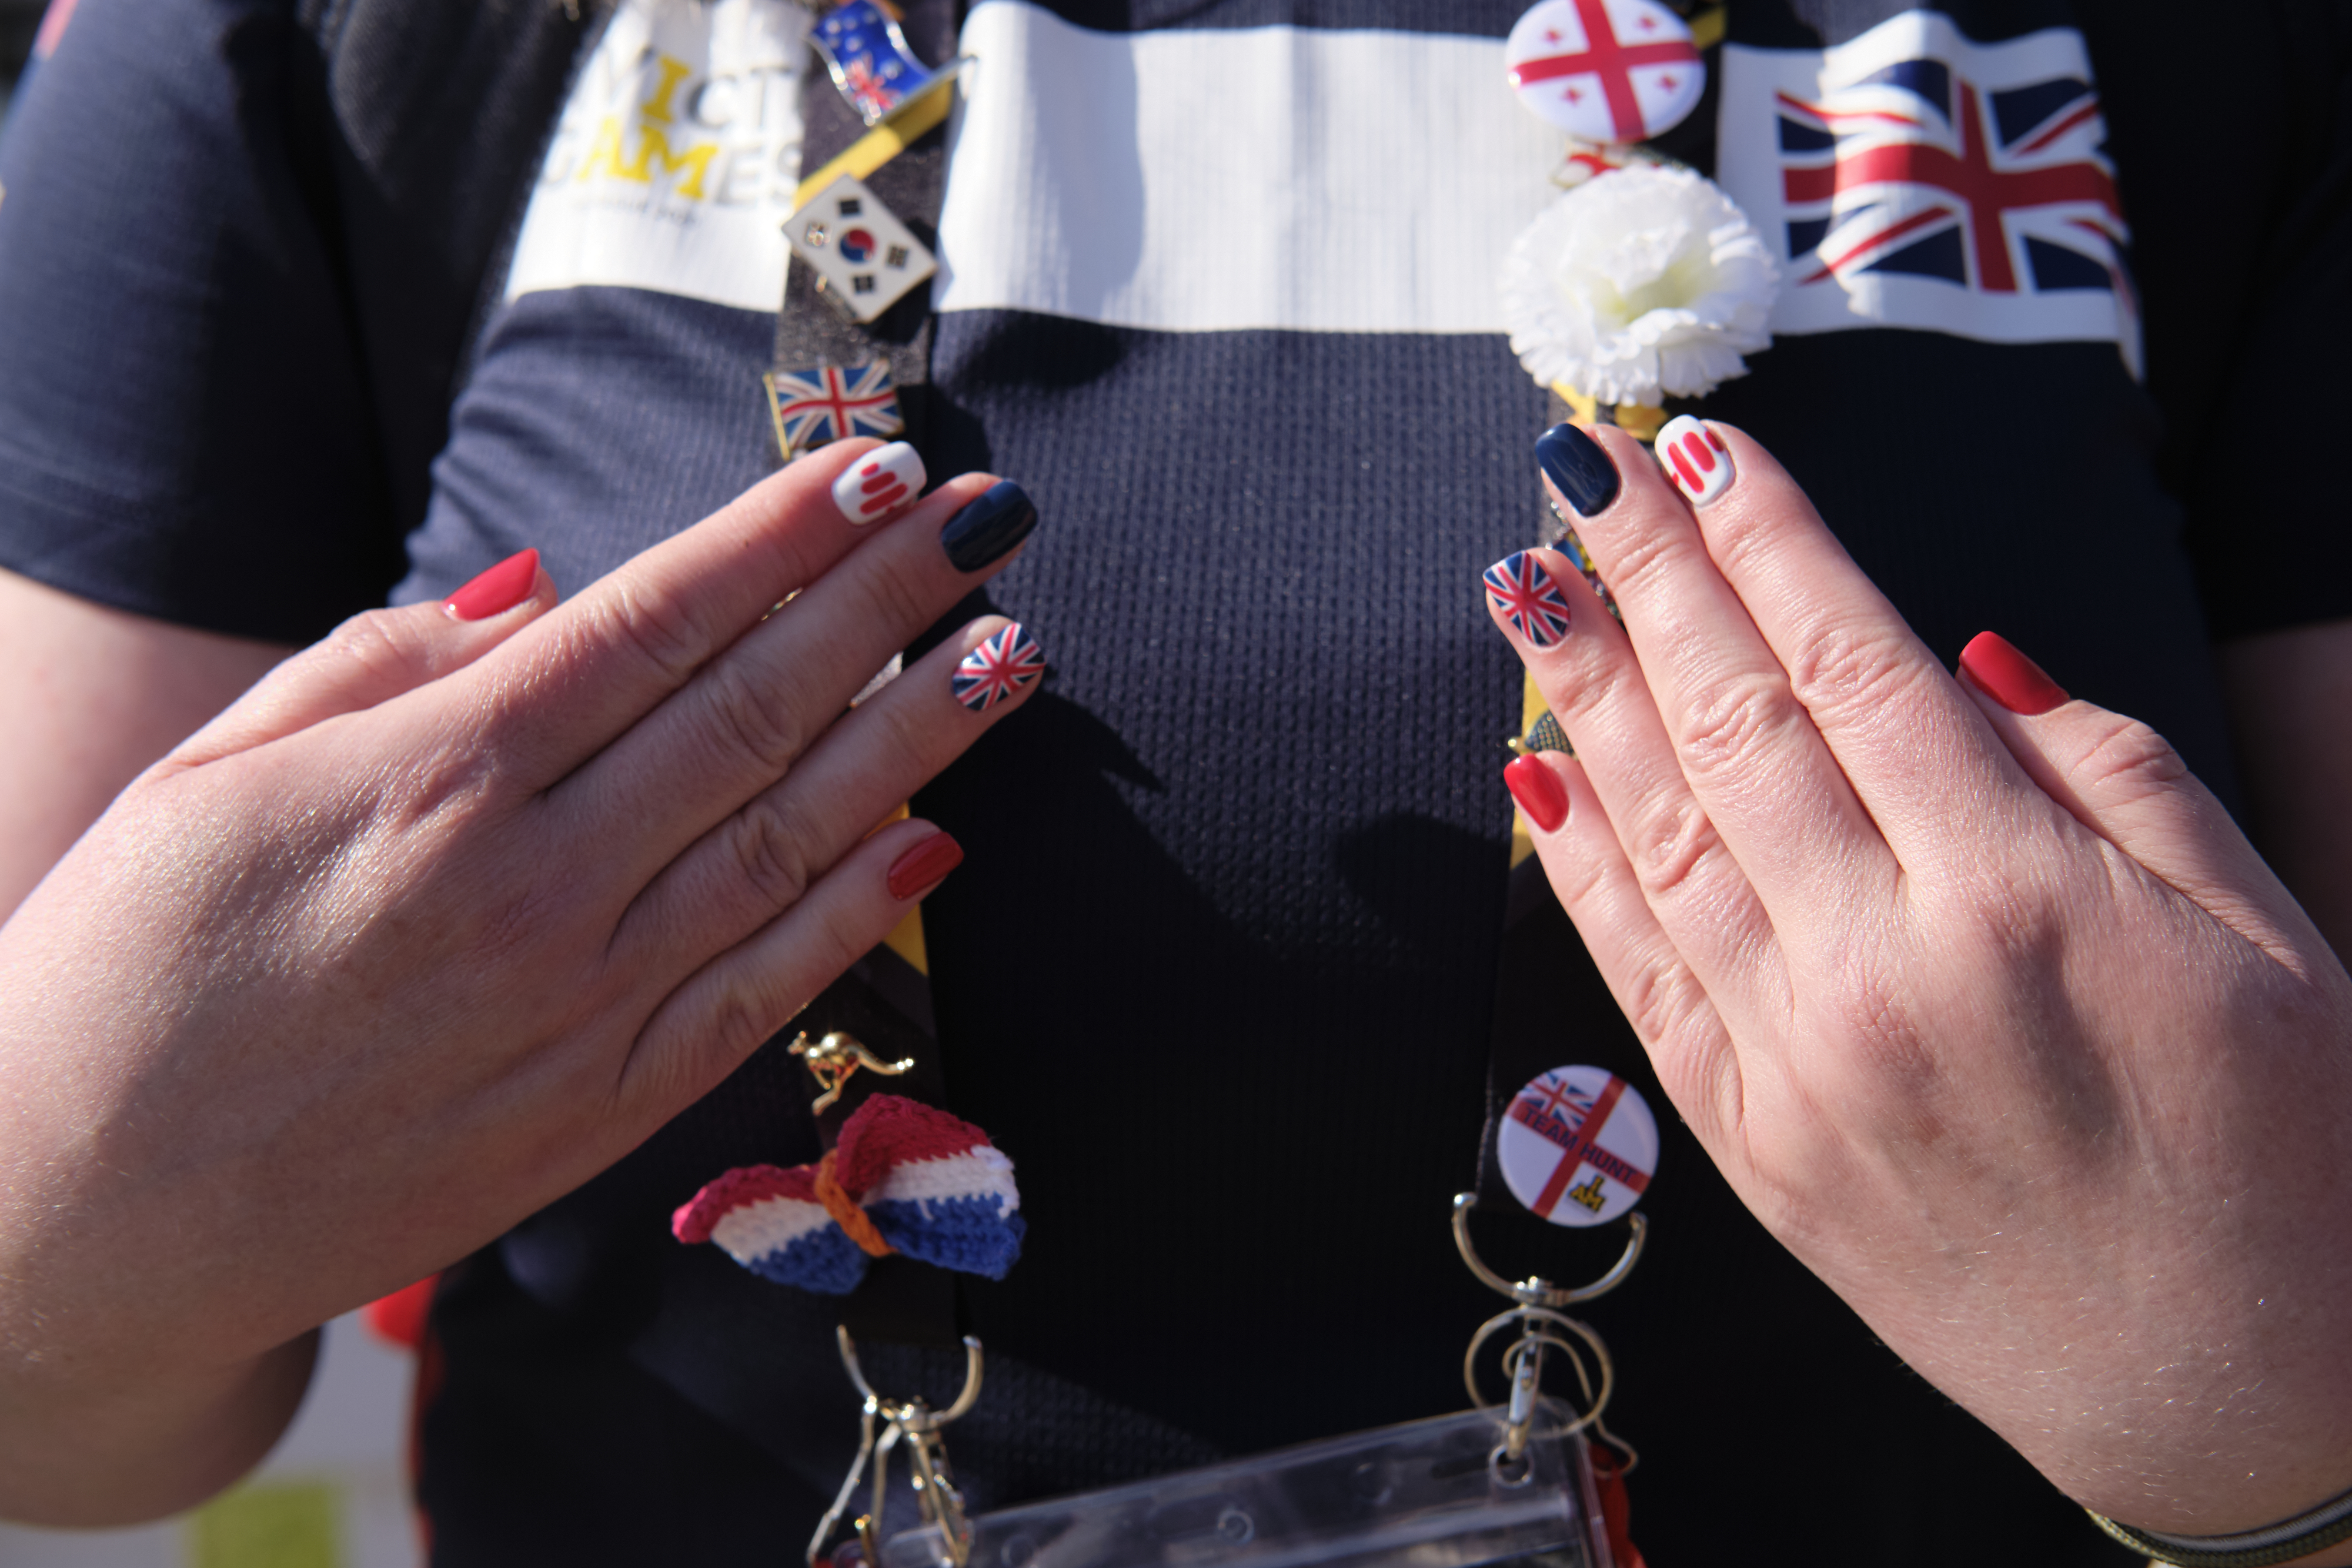 Hands with UK themed nail art.